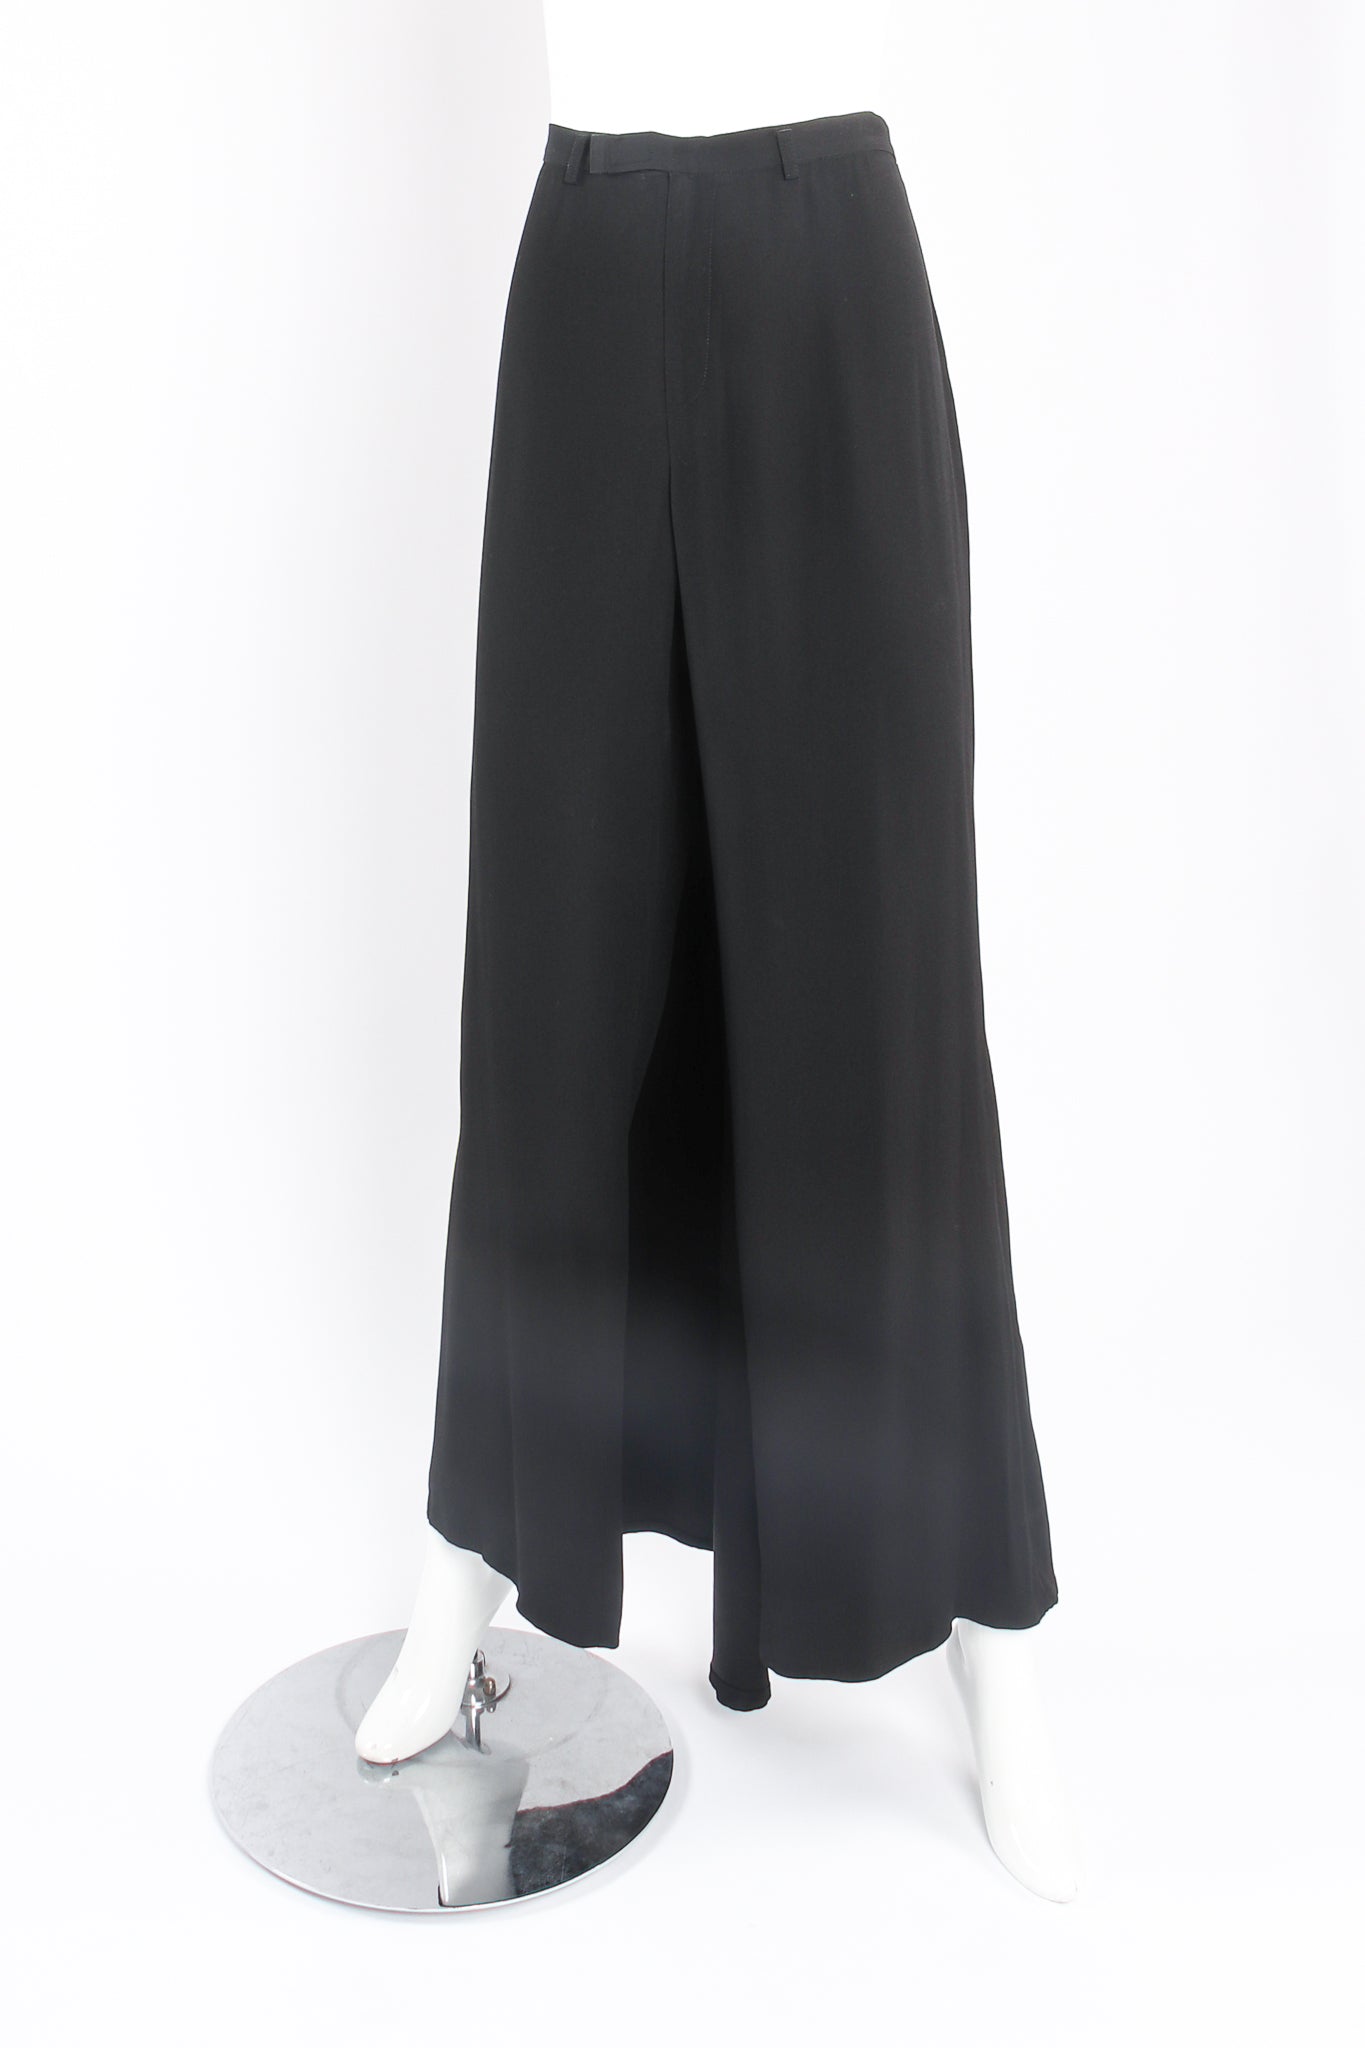 Vintage Jean Paul Gaultier Trouser Suiting Skirt on mannequin front at Recess Los Angeles